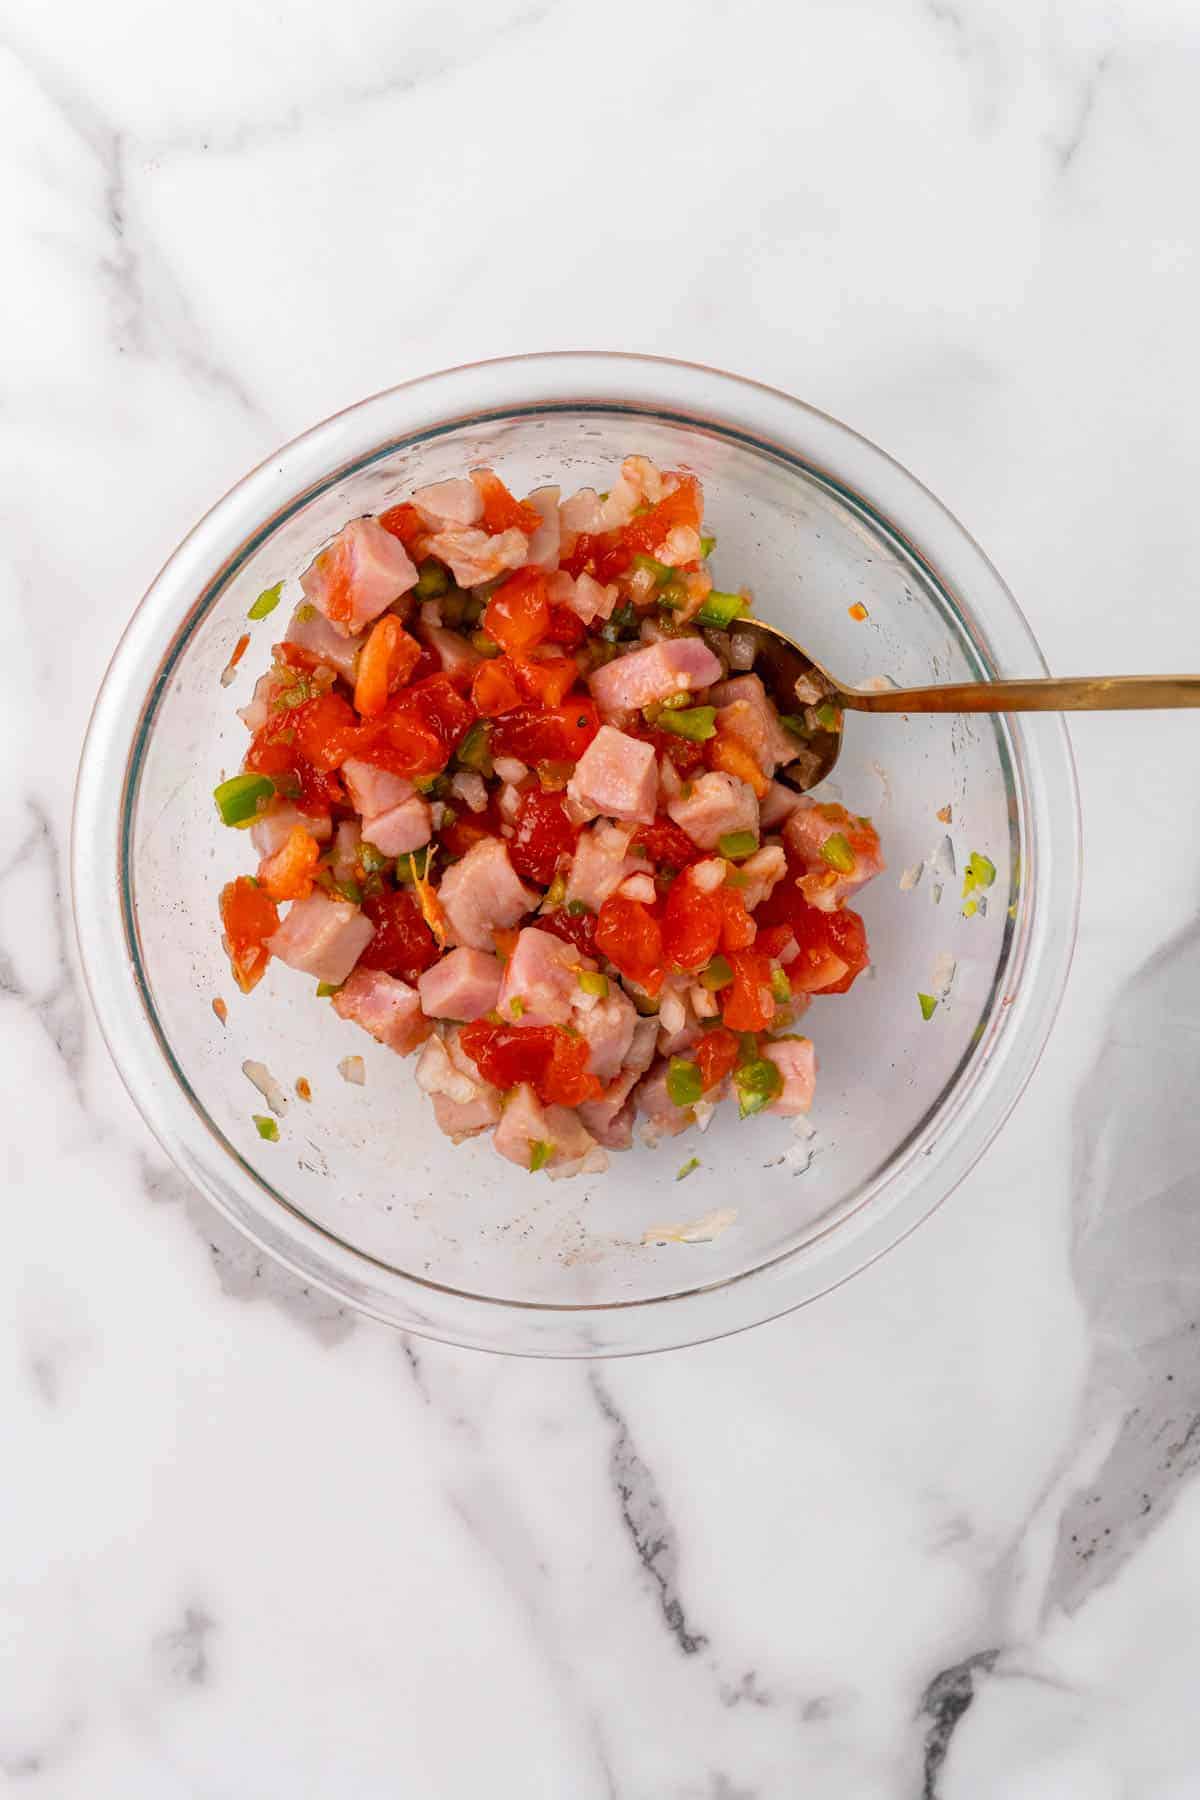 Ceviche ingredients mixed together in a glass bowl with a golden spoon, as seen from above